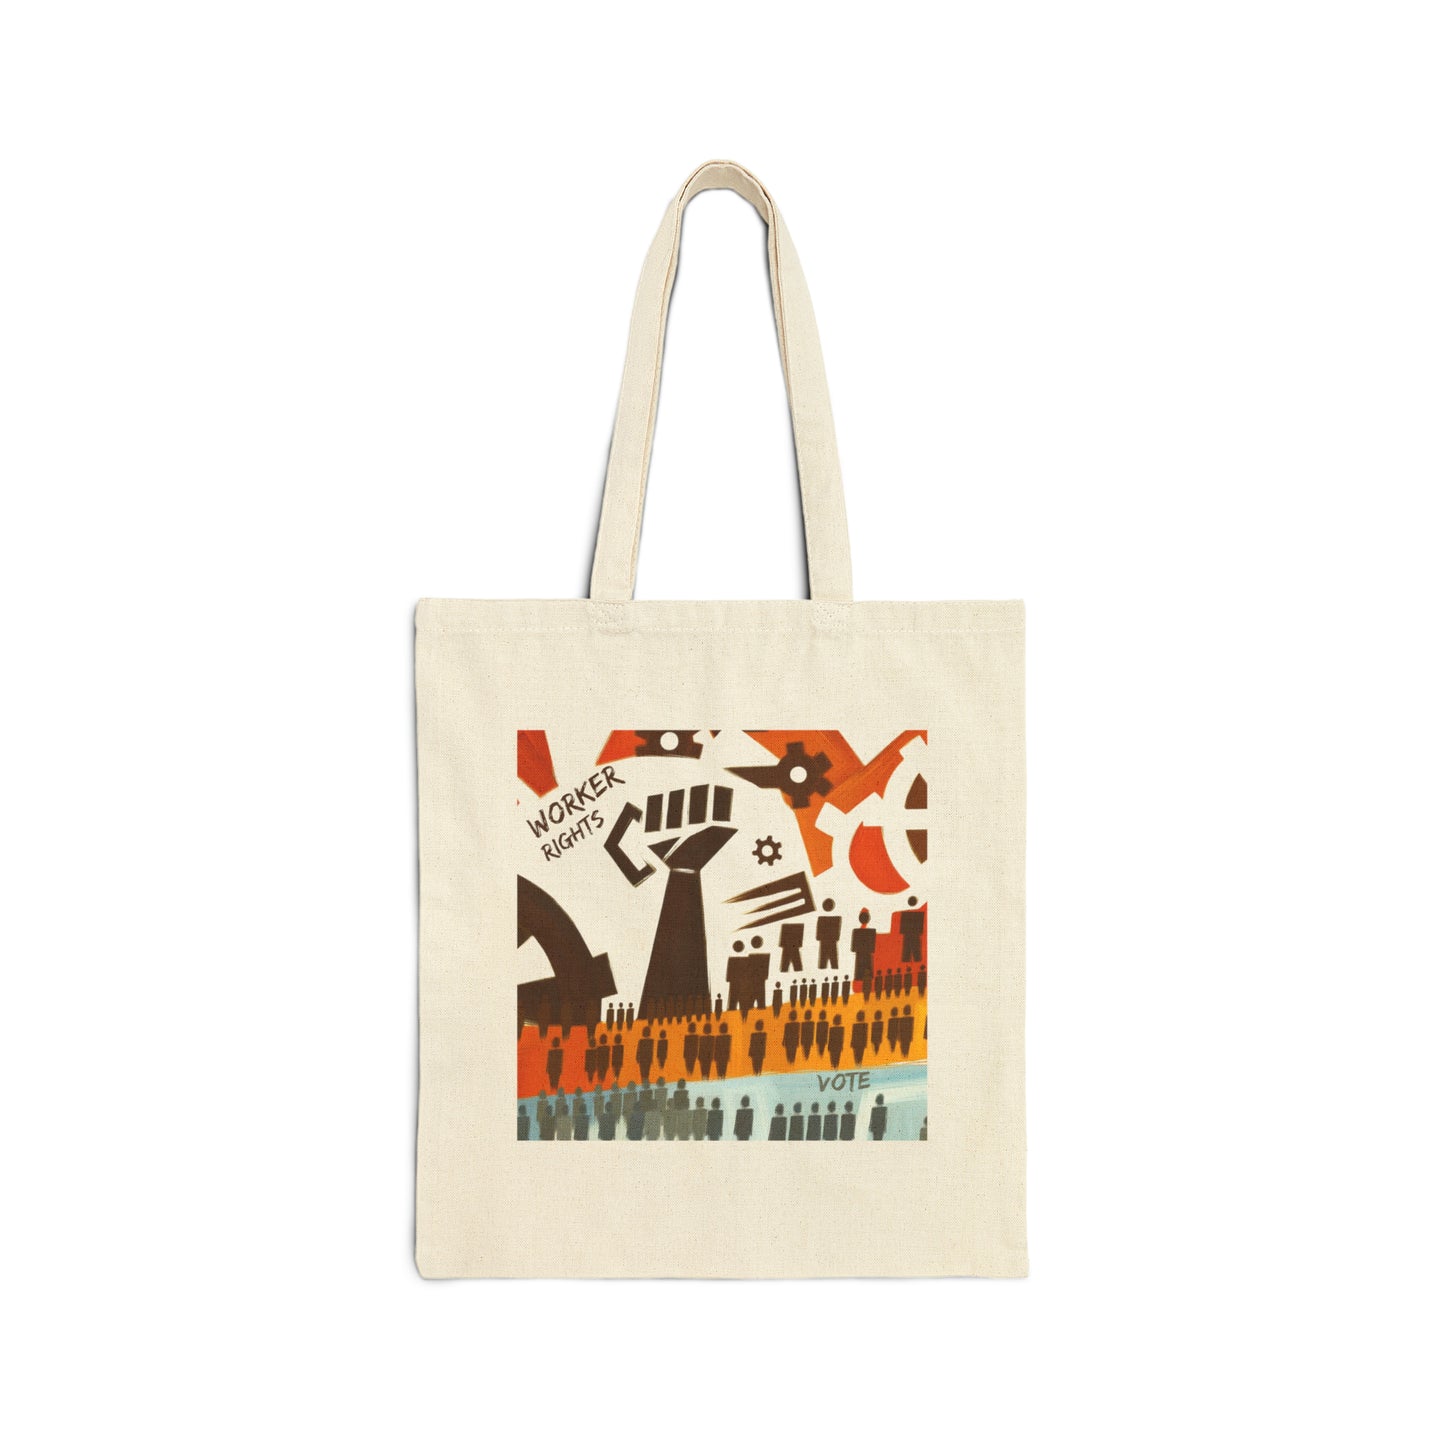 Worker Rights Vote (Canvas Tote Bag)